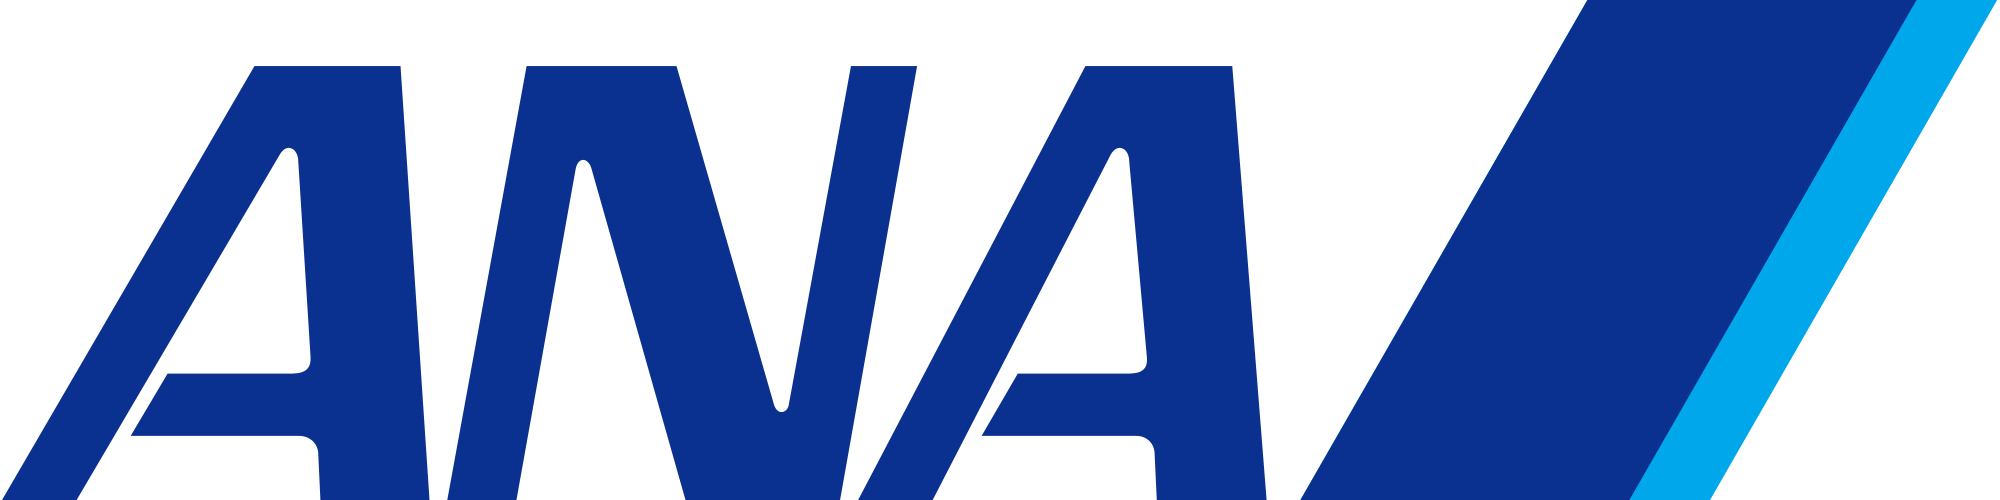 Japanese Airline Logo - All Nippon Airways